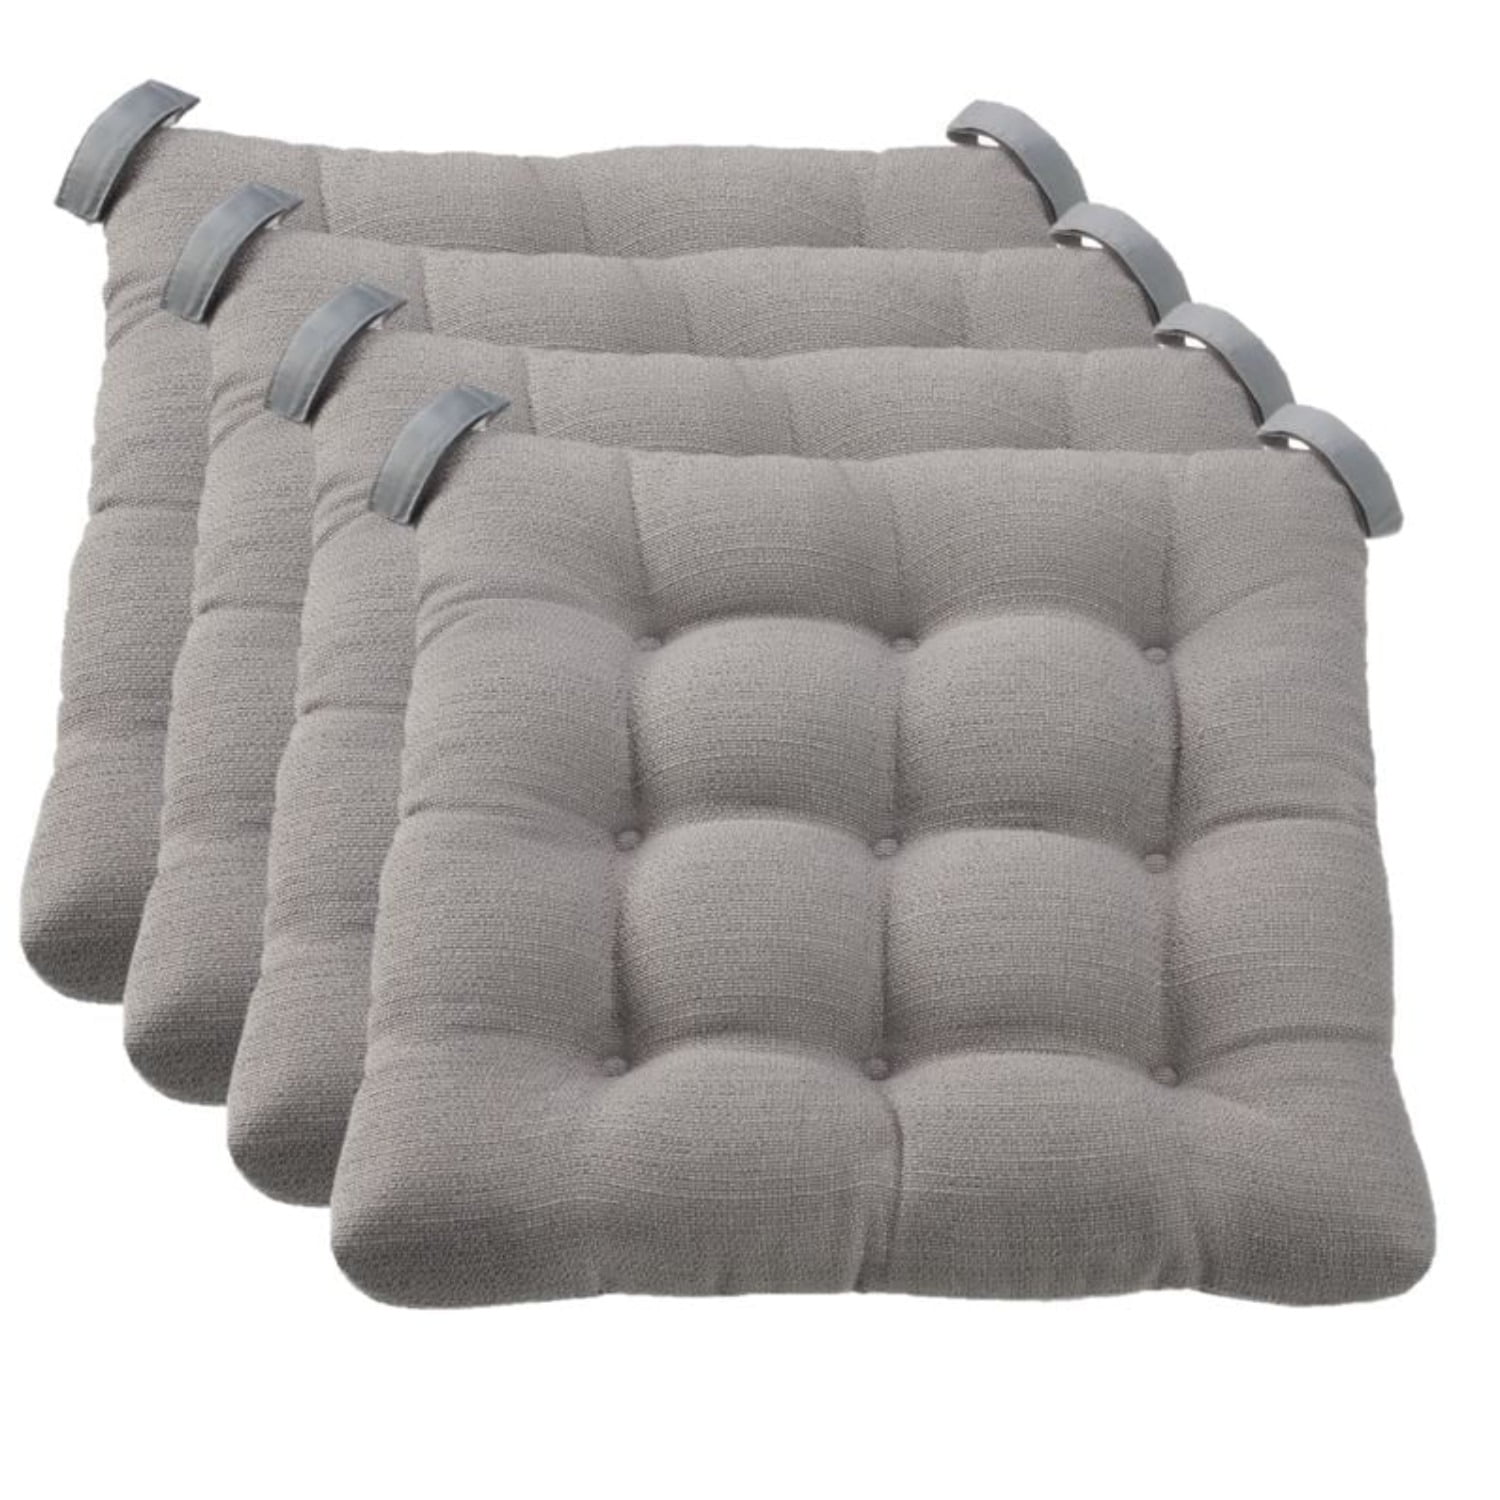 Mainstays 4-Piece Set 16 Textured Chair Seat Pad Chair Cushion Silver Color